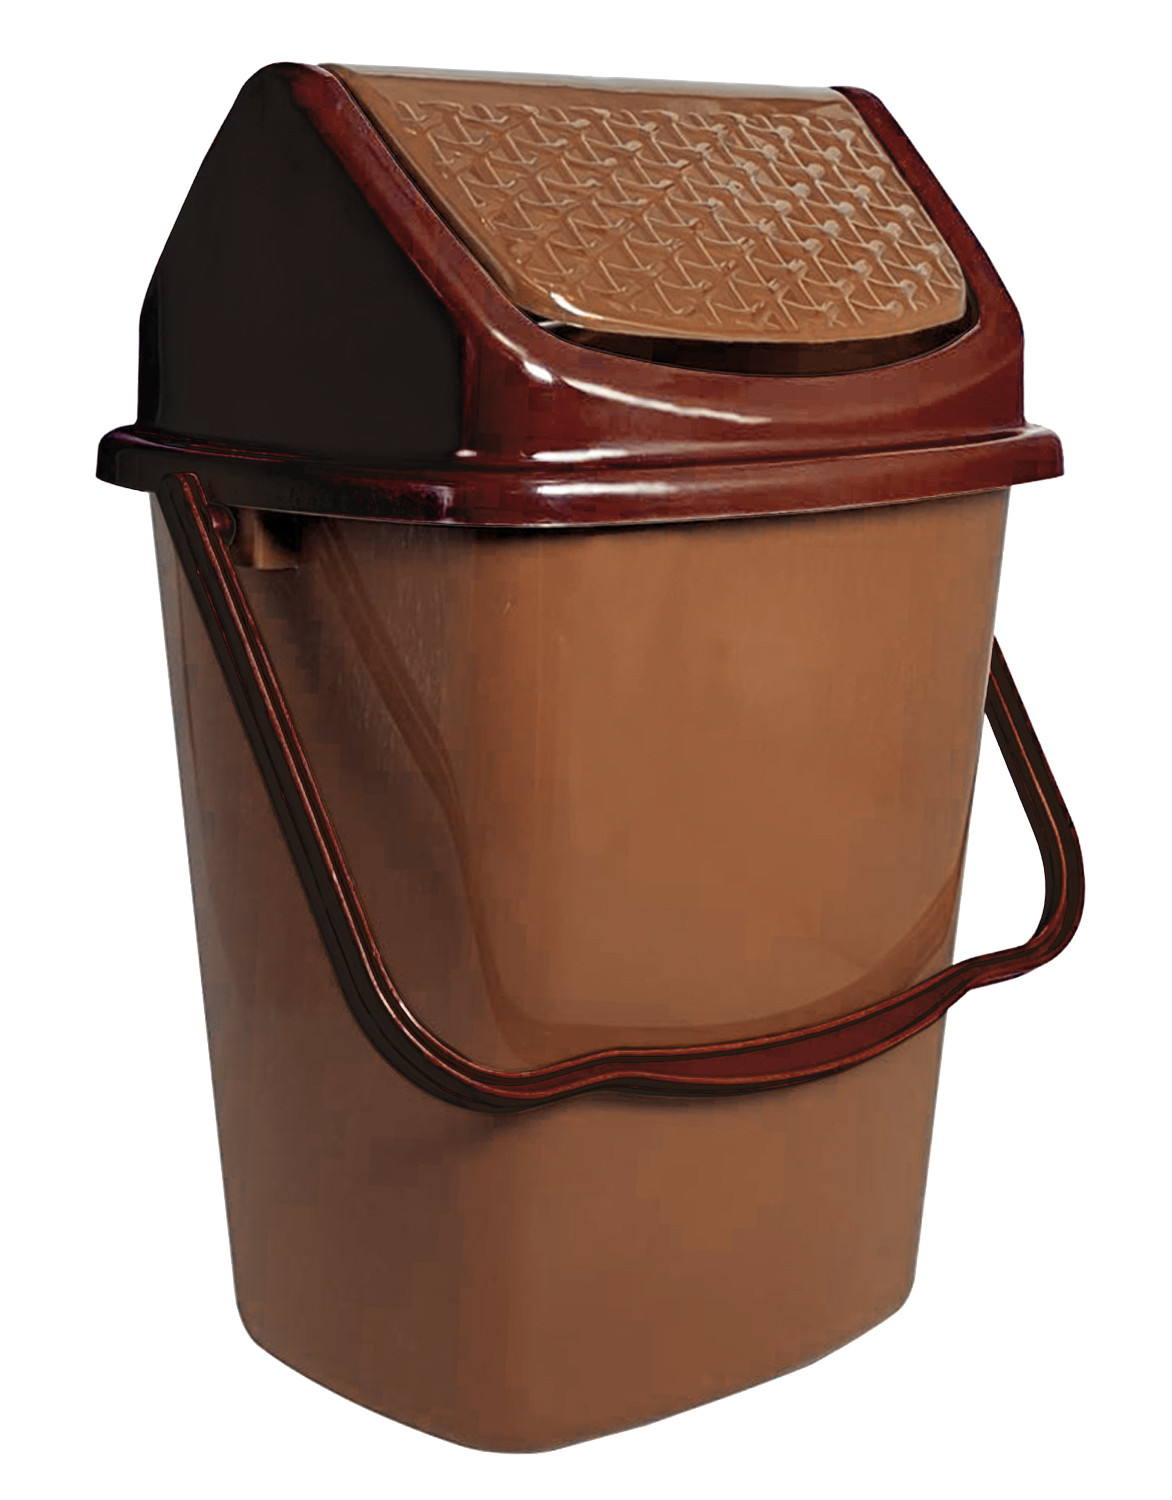 Kuber Industries Delight Plastic Swing  Garbage Waste Dustbin for Home, Office with Handle, 5 Liters (Brown & Light Brown)